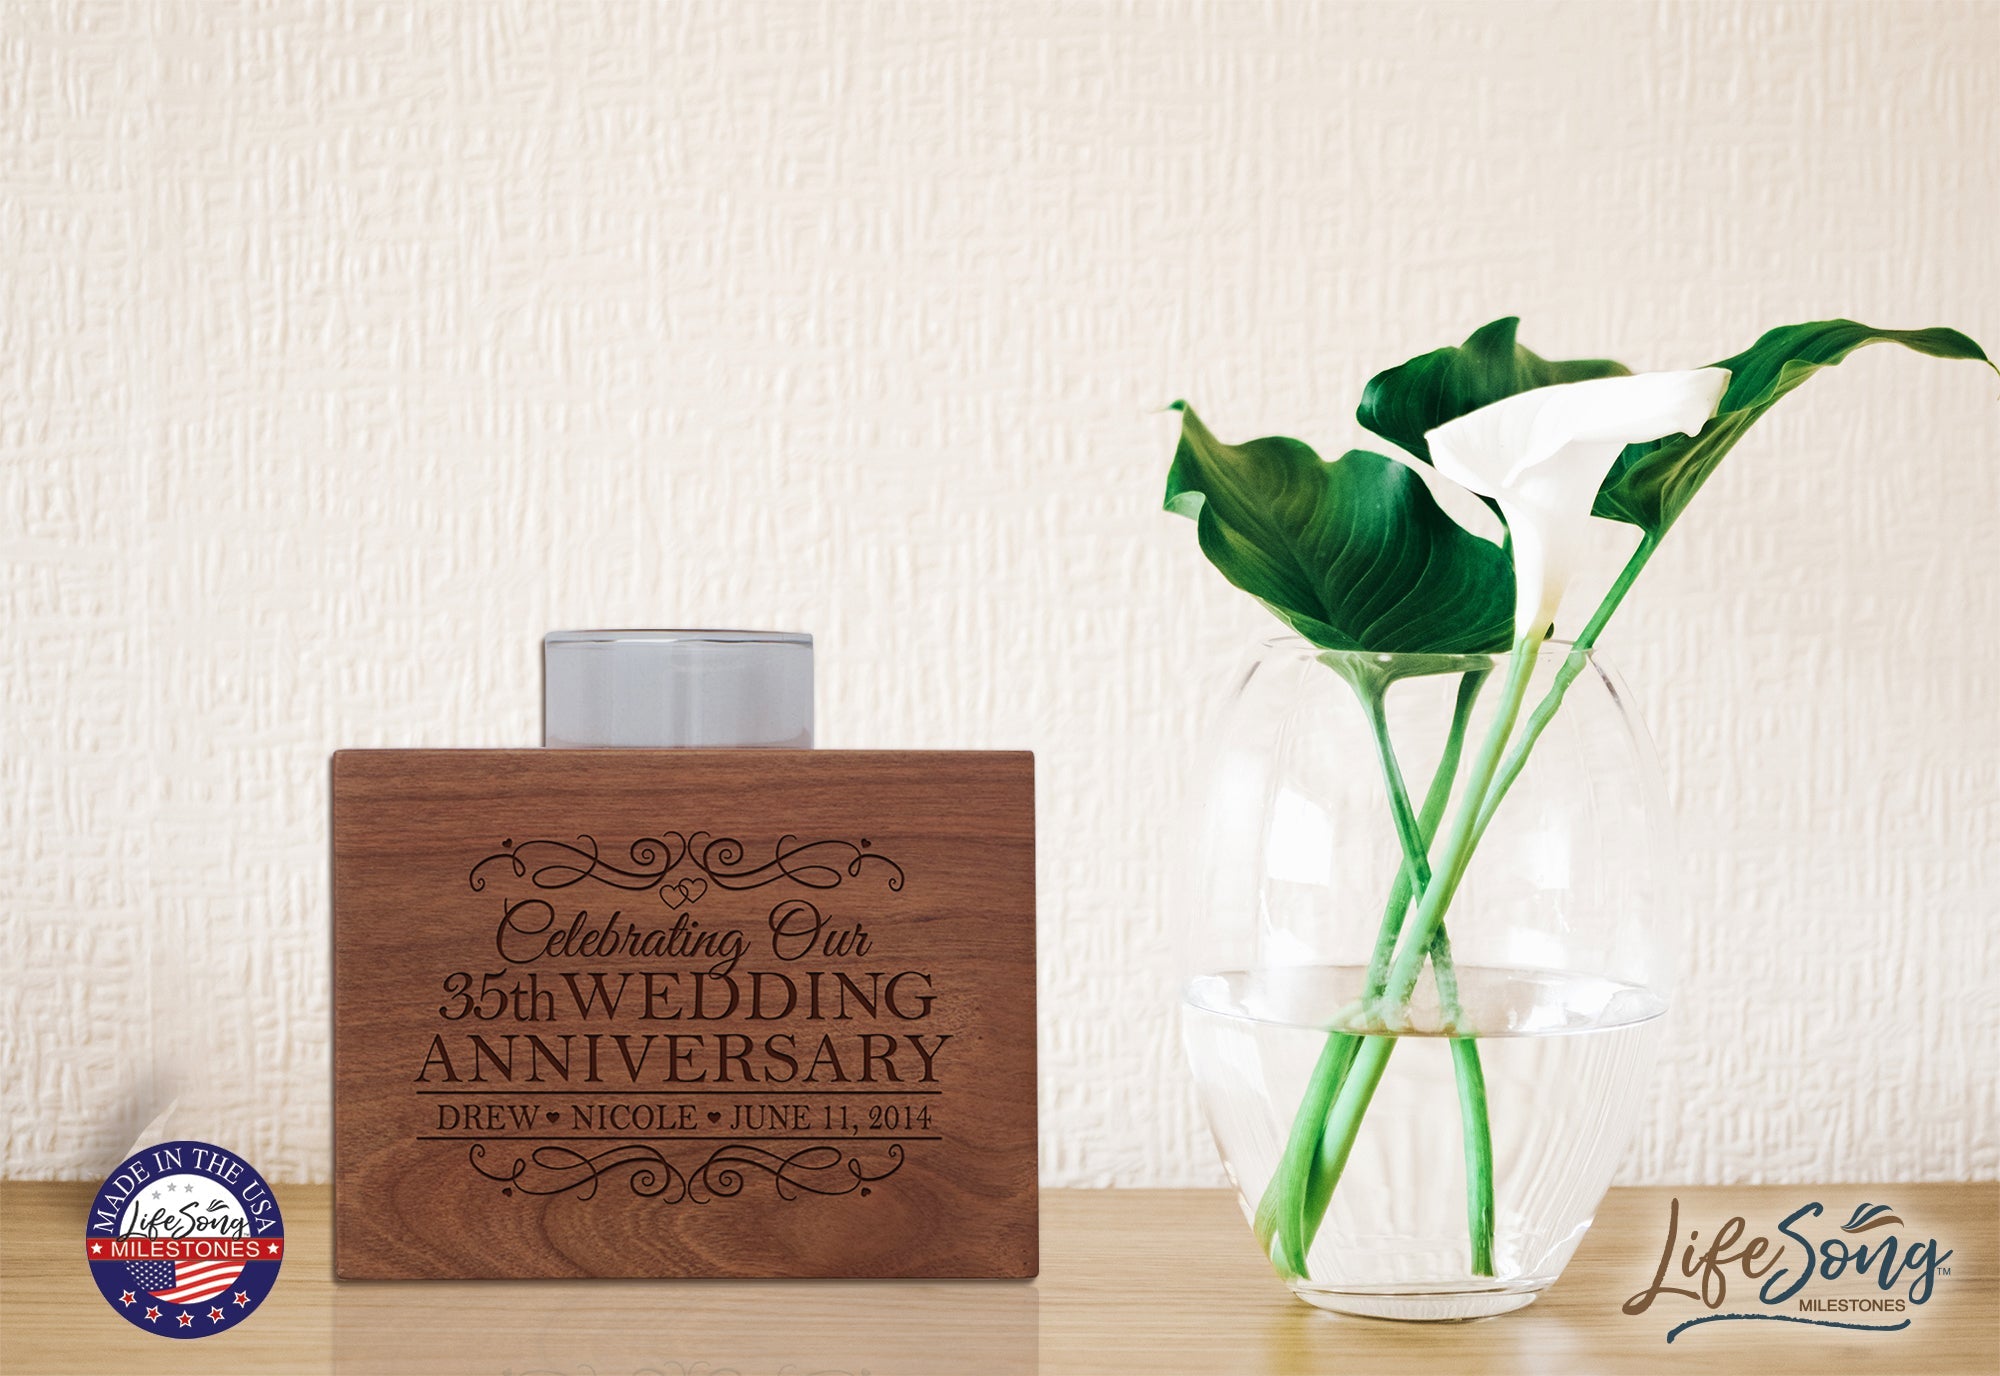 Personalized Cherry Wood Single Votive Candle Holder - 35th Wedding Anniversary - LifeSong Milestones